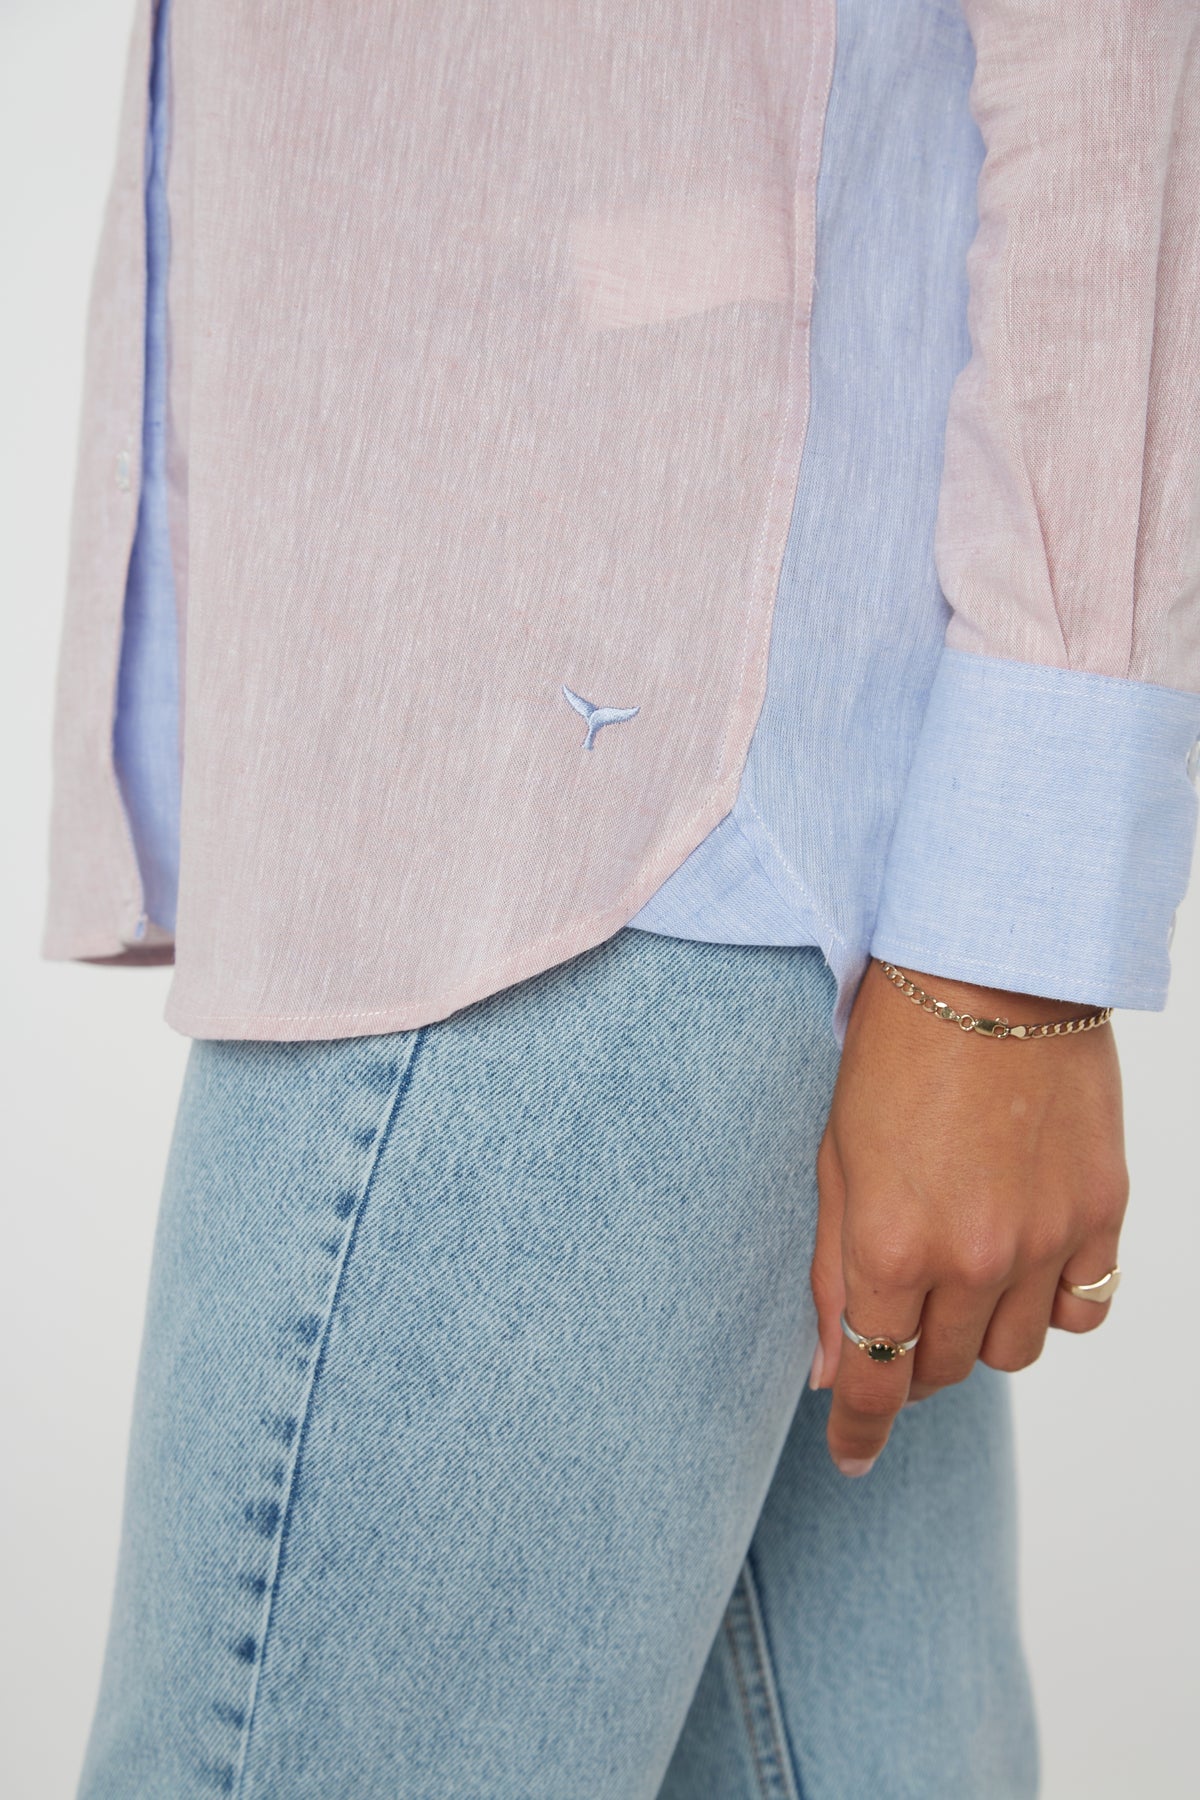 Stamford Linen Shirt - Pink/Blue - Whale Of A Time Clothing